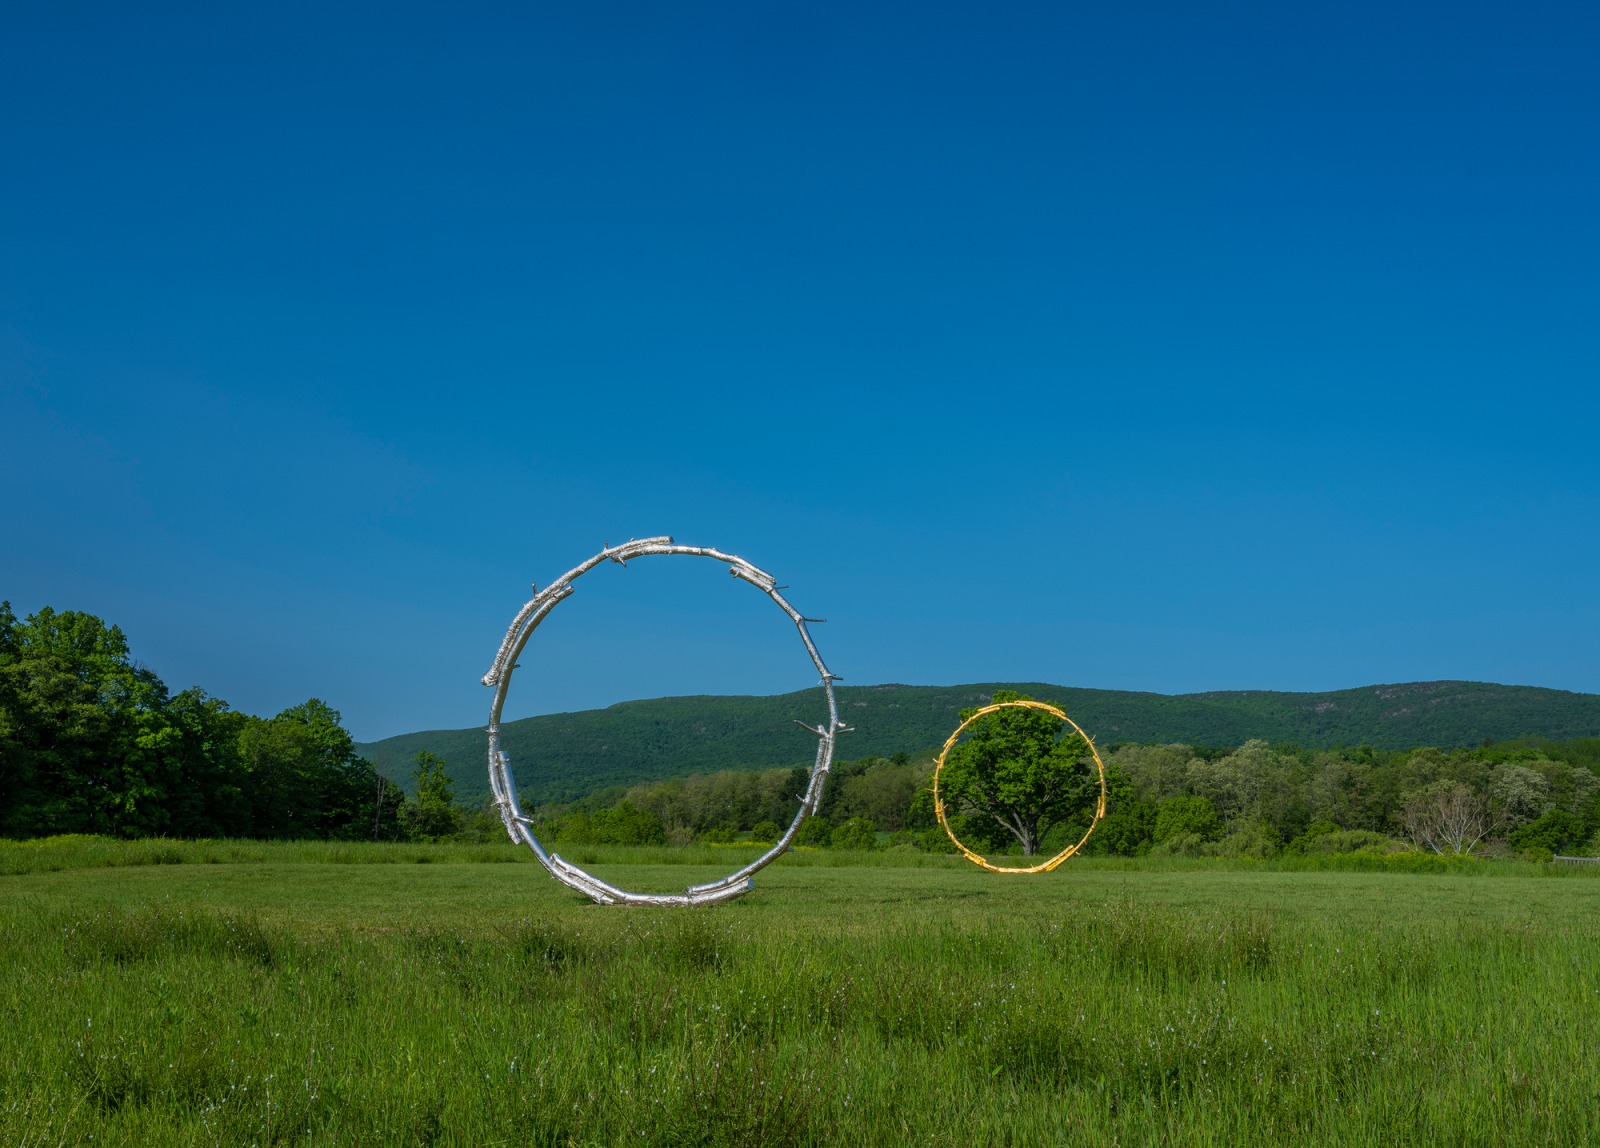 <div class="image_caption_container"><div class="image_caption"><p><span>Exhibition view: Ugo Rondinone, <b>the sun and the moon</b>, Storm King Art Center, New Windsor, New York, 2023. </span>Photo © Jeffery Jenkins</p></div></div>